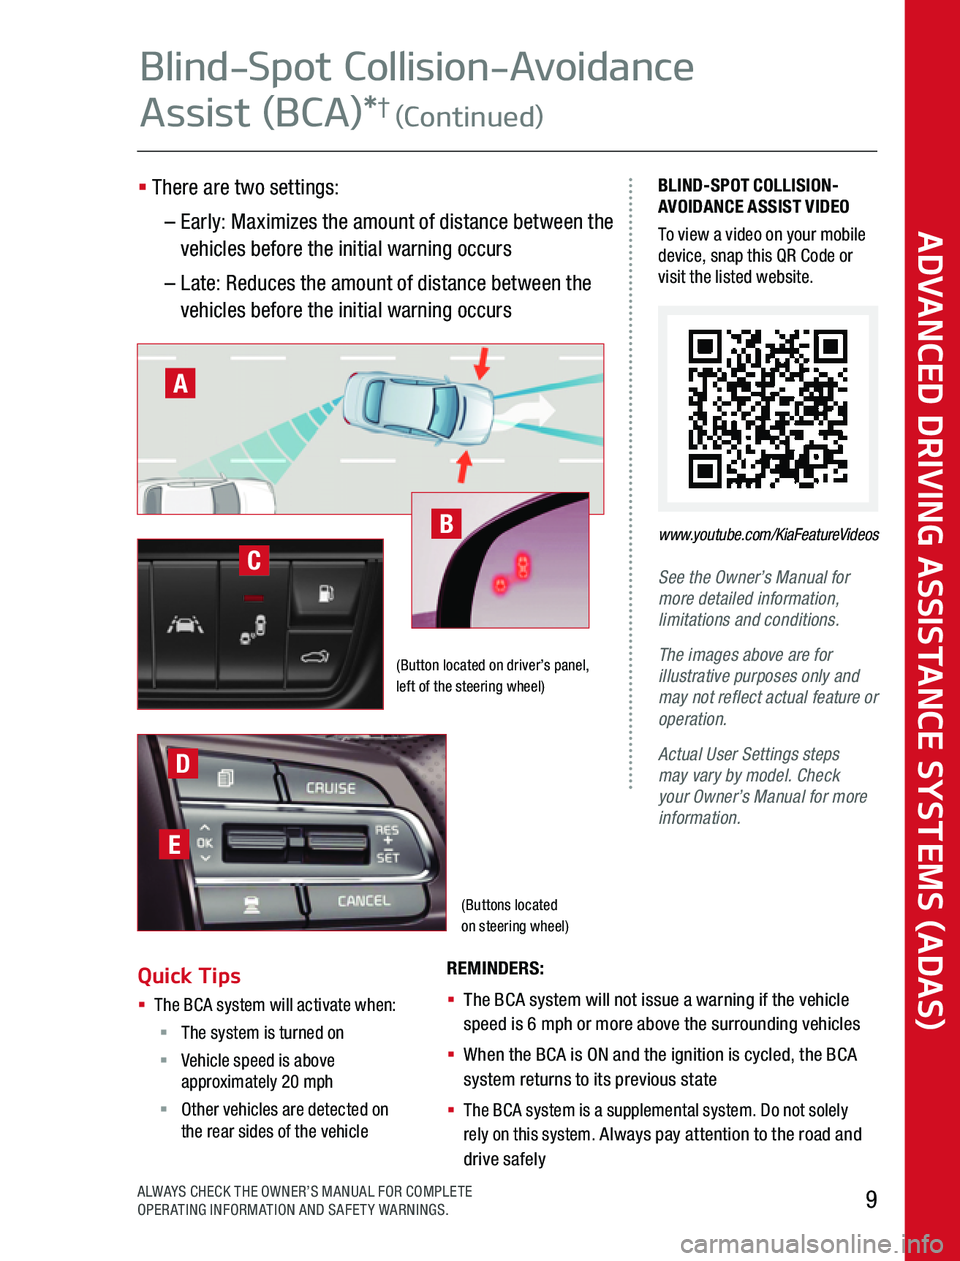 KIA SOUL 2020  Advanced Driving Assistance System (Buttons located  on steering wheel)
BLIND-SPOT COLLISION-AVOIDANCE ASSIST VIDEOTo view a video on your mobile device, snap this QR Code or visit the listed website  
See the Owner’s Manual for more